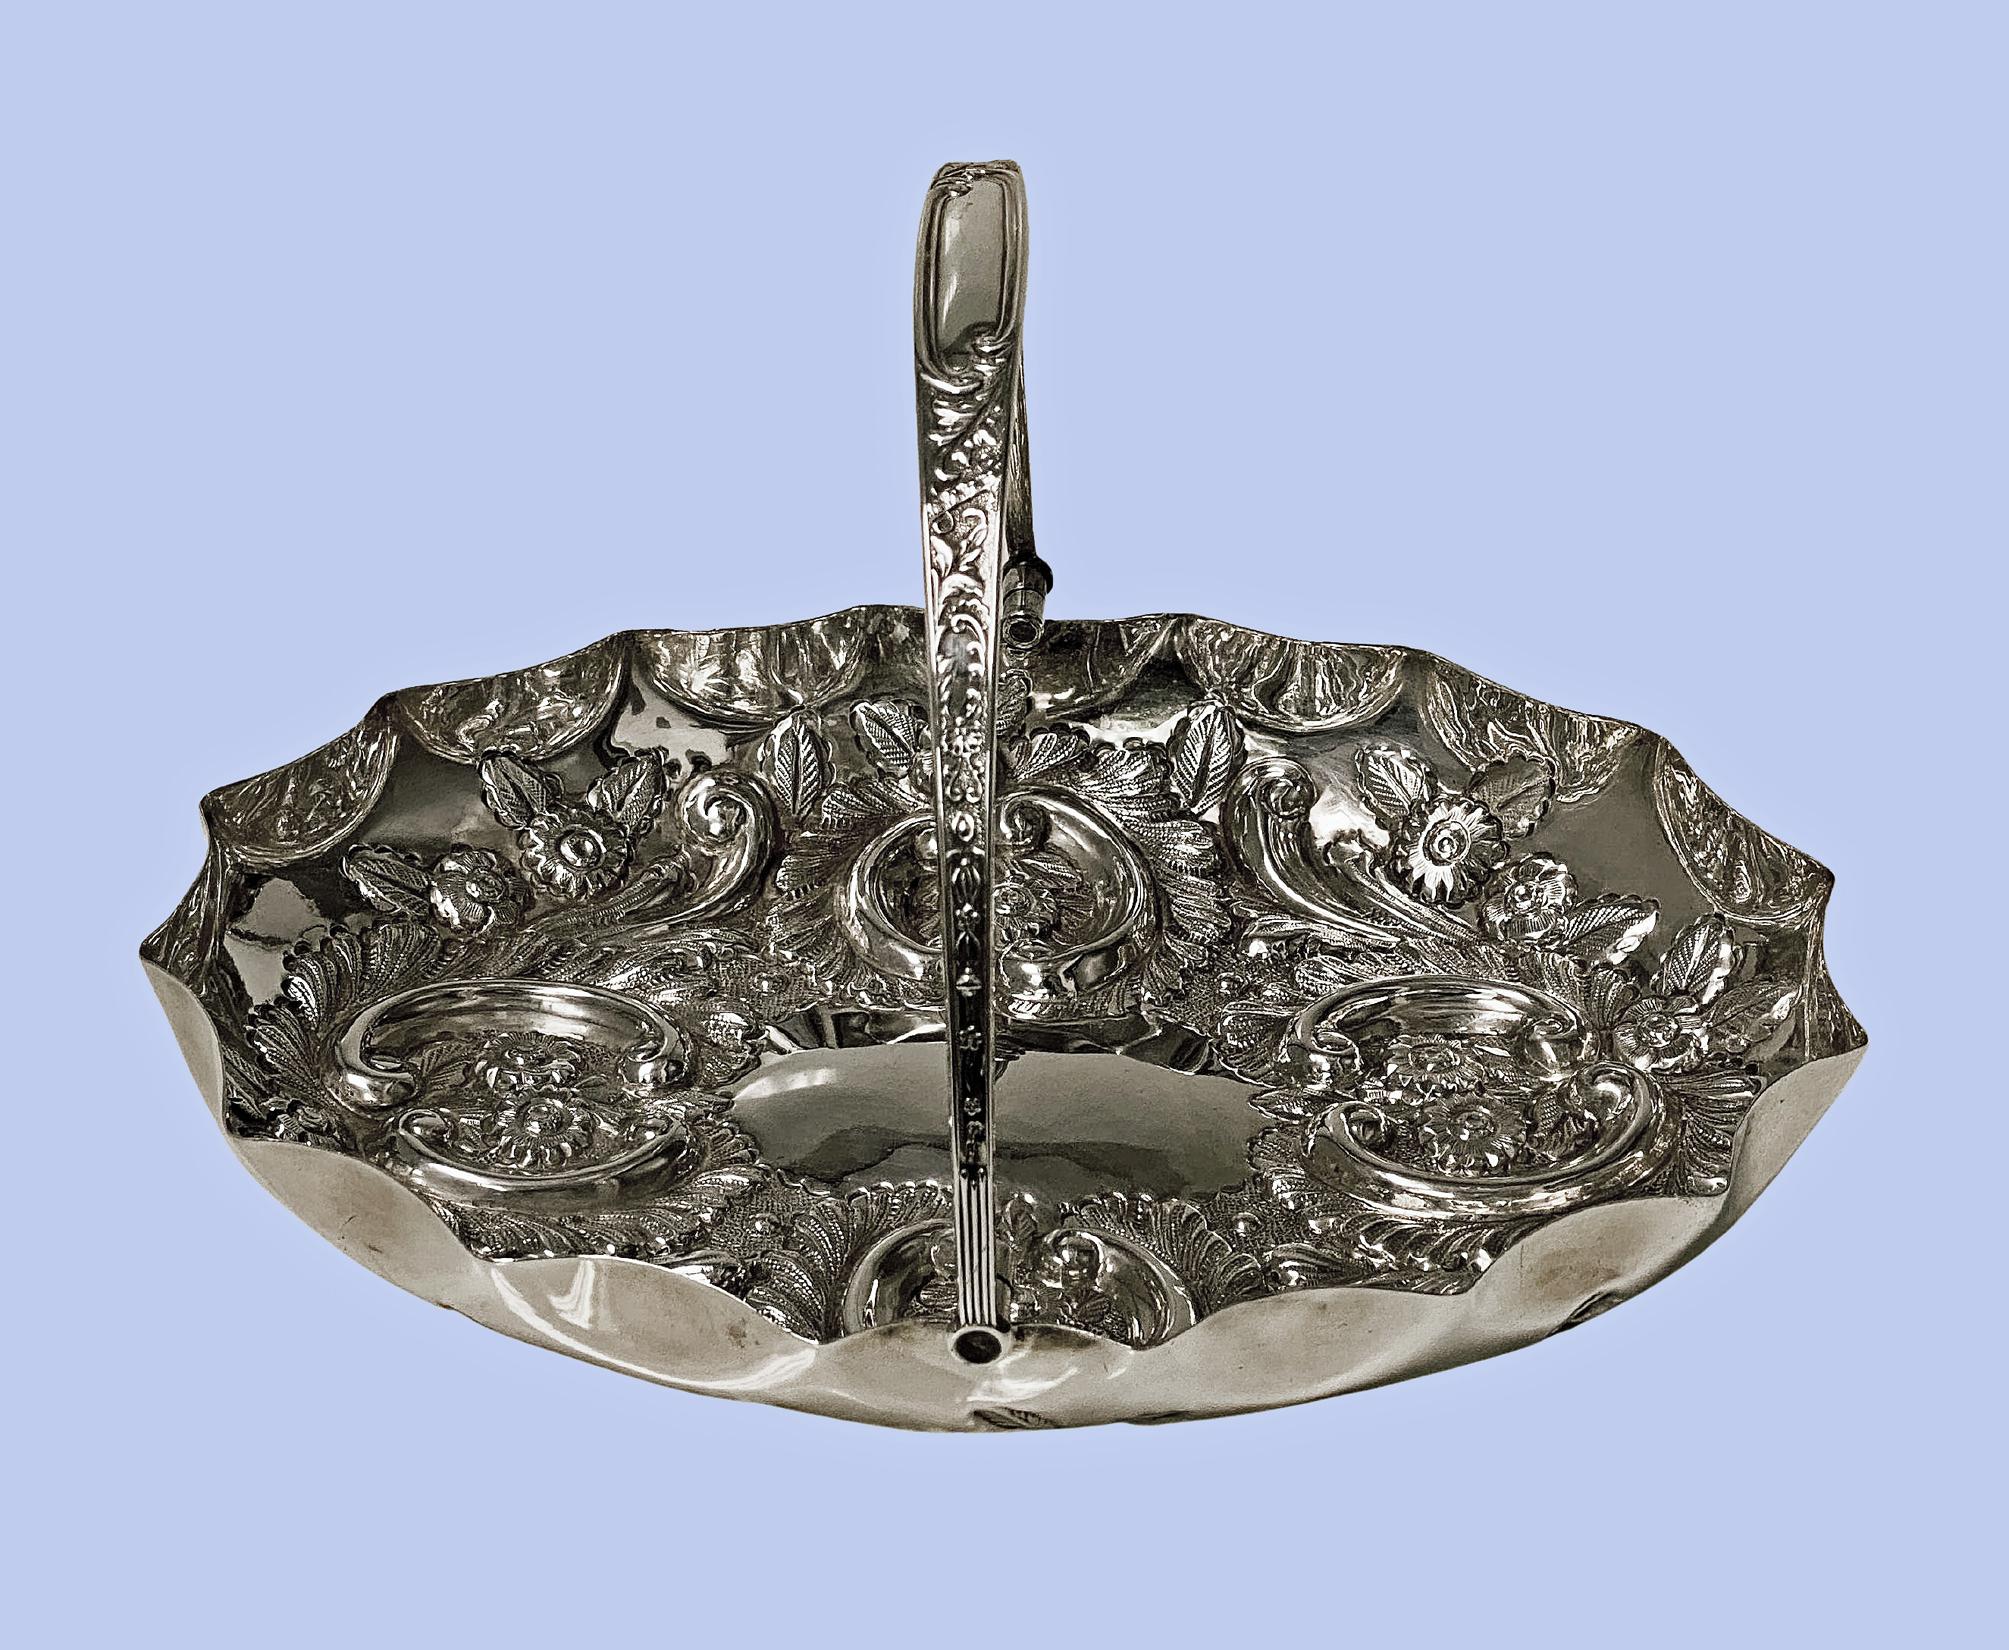 Antique English Sterling Silver Fruit dish basket, Birmingham 1902, Bennett Ltd. The oval basket with scalloped border the centre plain with a surround of very elaborately embossed repoussé fruits and foliage decoration. Measures: 10.00 x 7.50 x